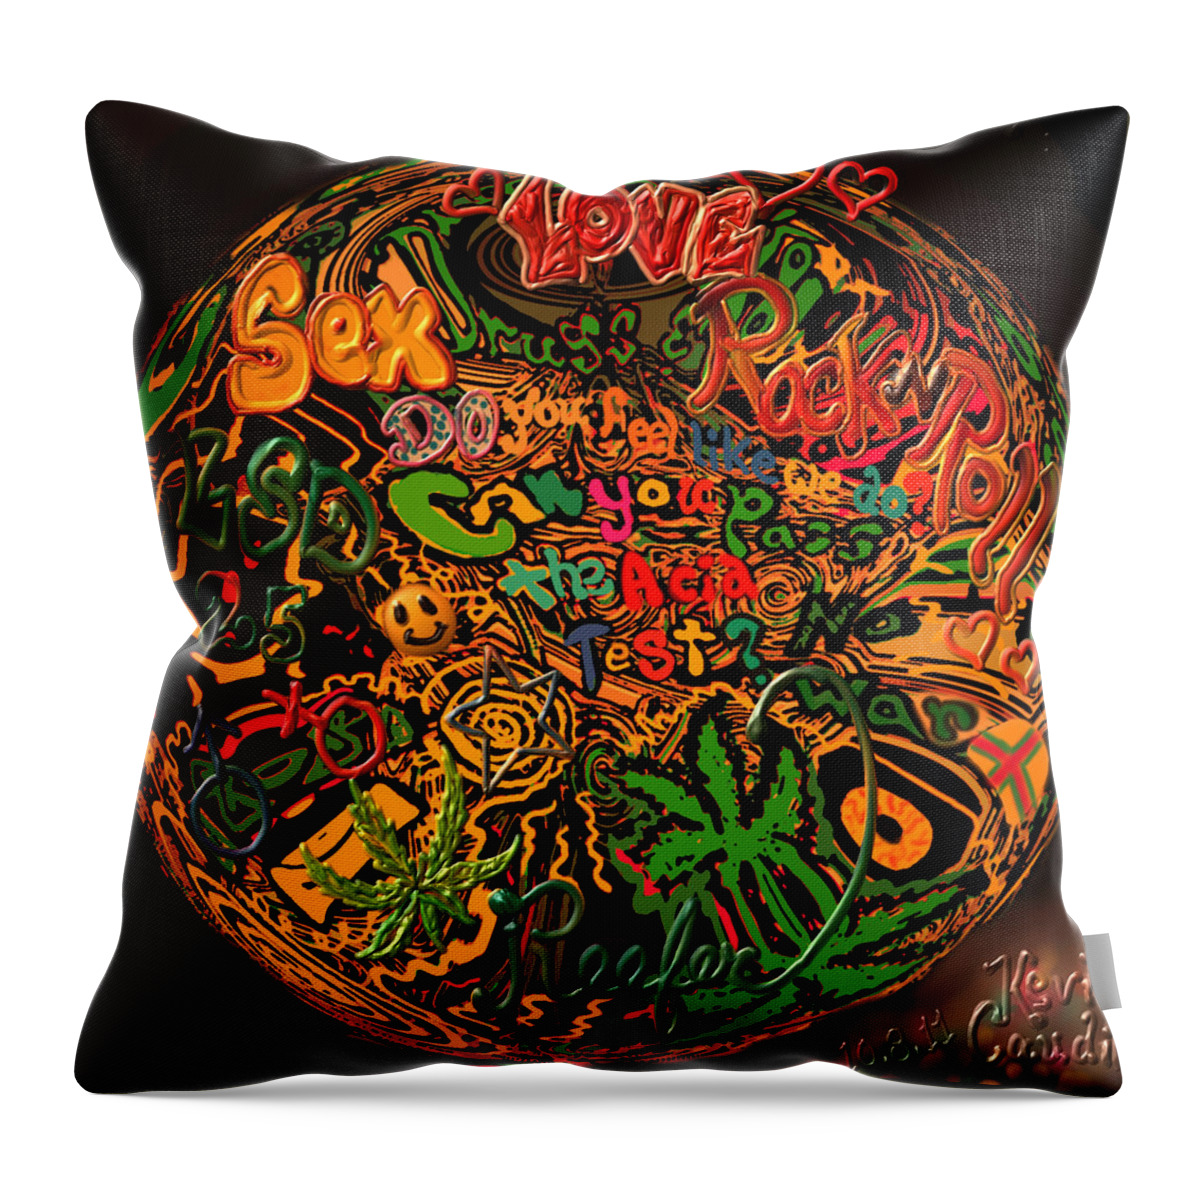 Sex Throw Pillow featuring the painting Art Of Sixtynine by Kevin Caudill